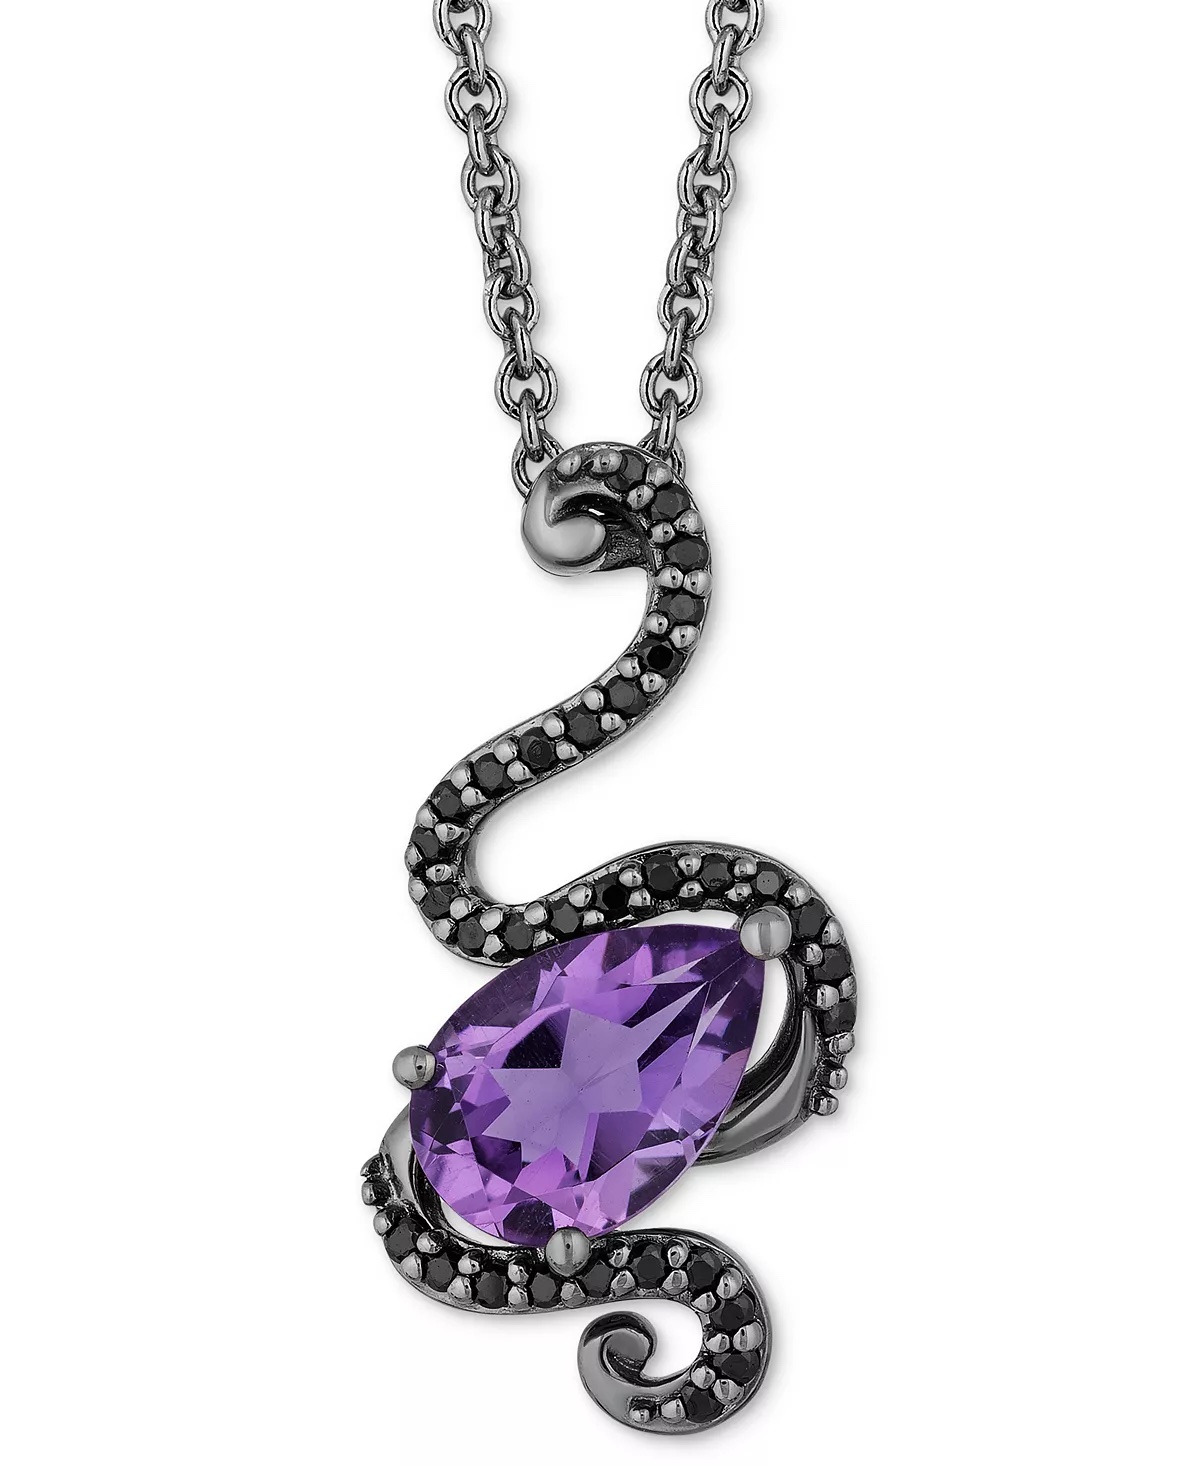 Amethyst (1-1/10 ct. t.w.) & Black Diamond (1/6 ct. t.w.) Ursula Tentacle Pendant Necklace in Black Rhodium-Plated Sterling Silver, 16" + 2" extender